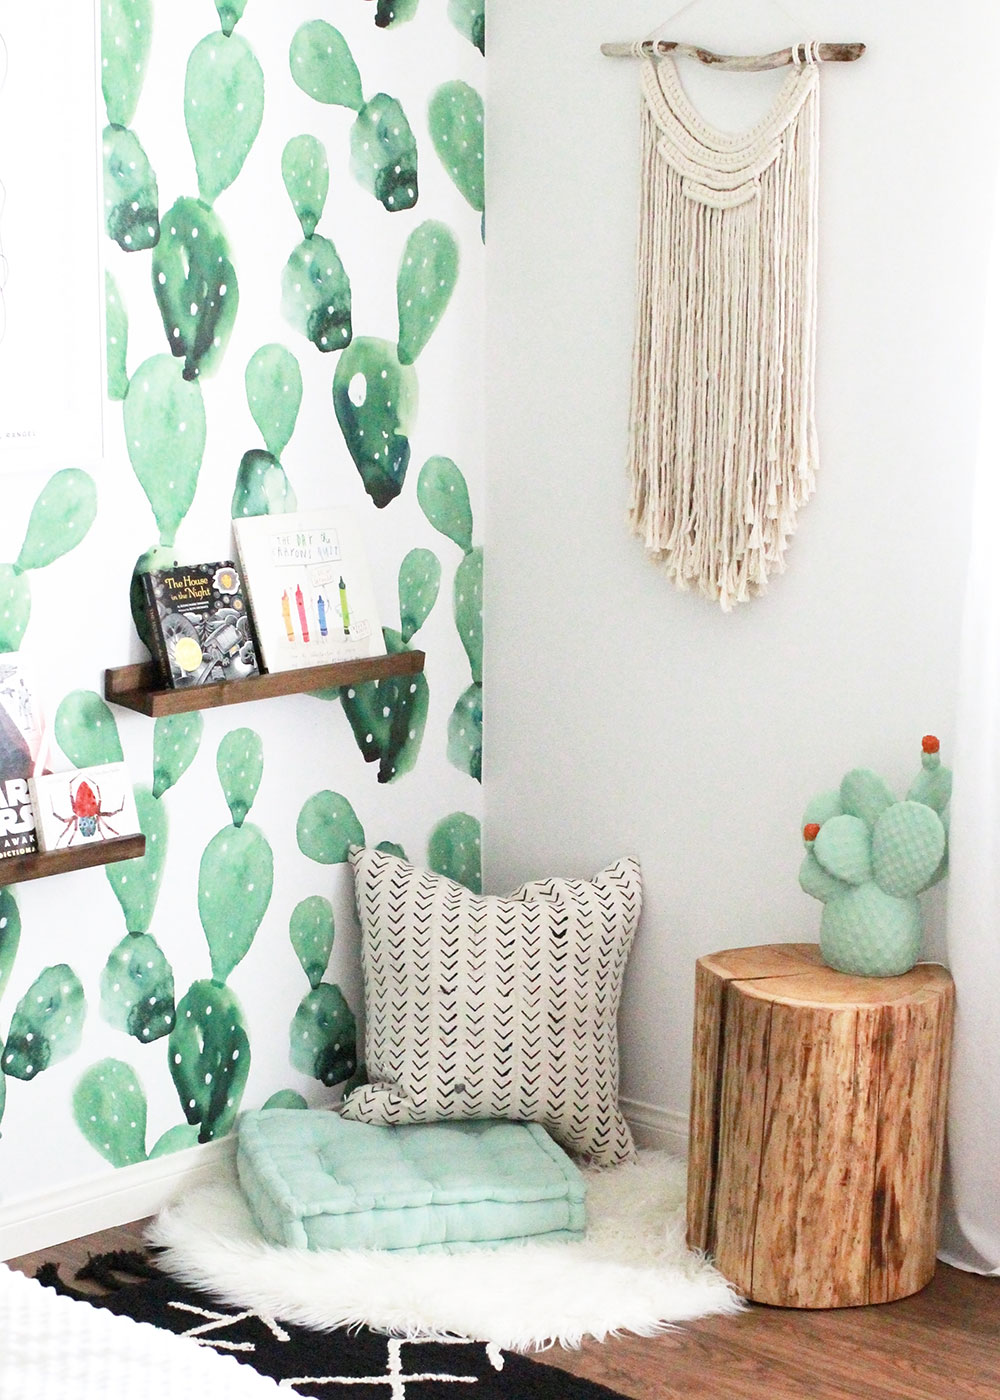 this corner because the perfect spot for a reading nook, with floor pillows, wall shelves, and a fun cactus lamp | thelovedesignedlife.com